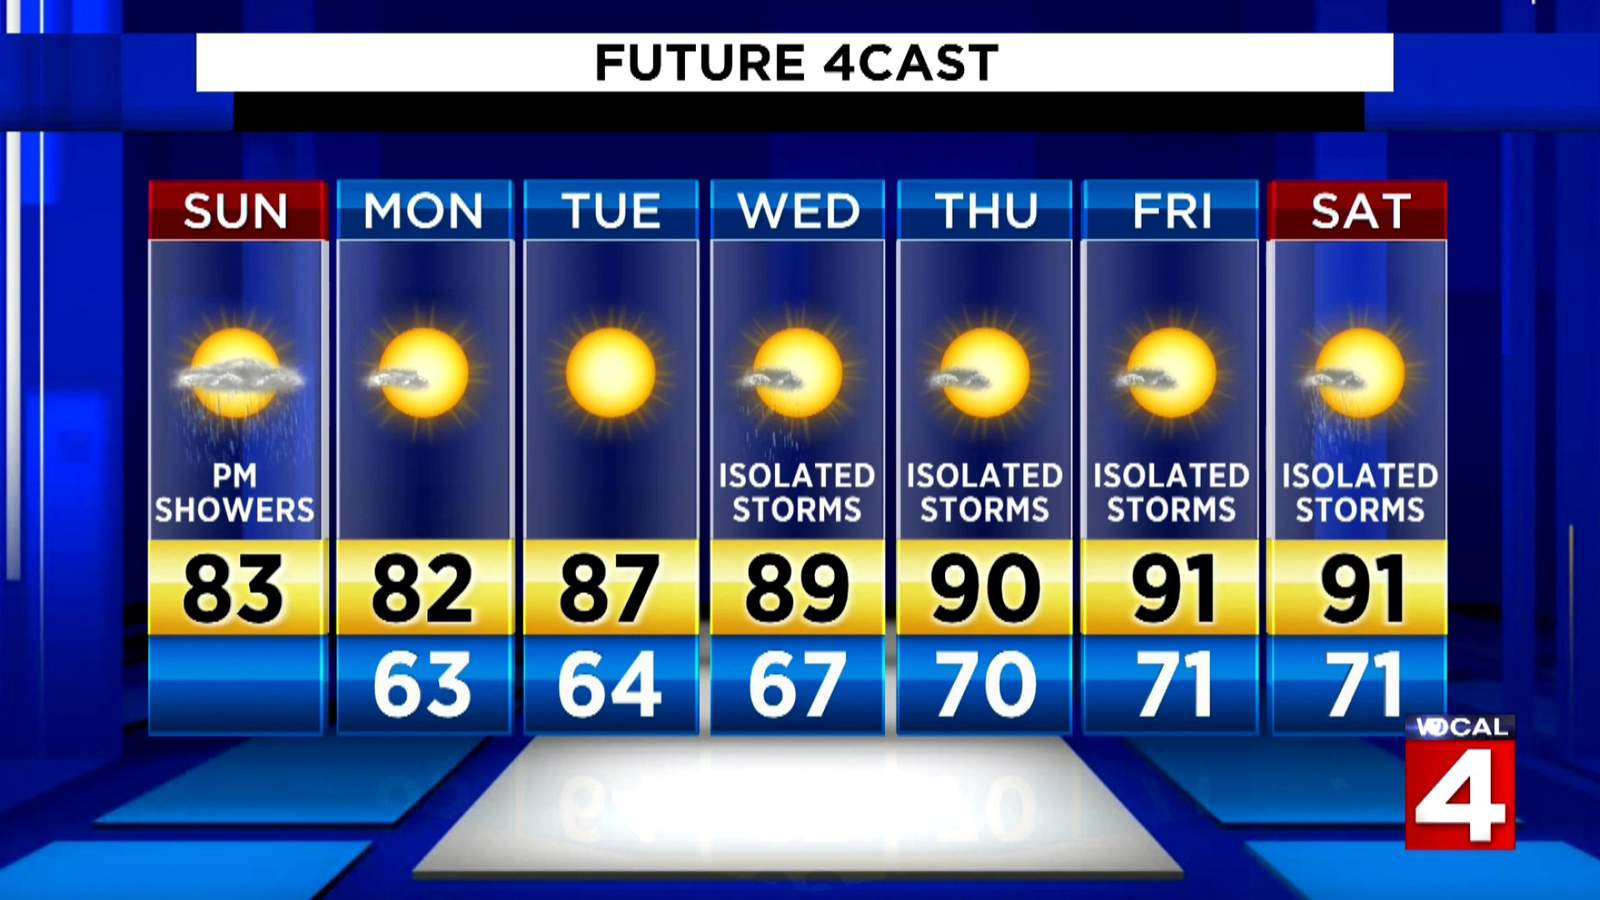 Metro Detroit weather: Sunday afternoon warm with comfortable humidity